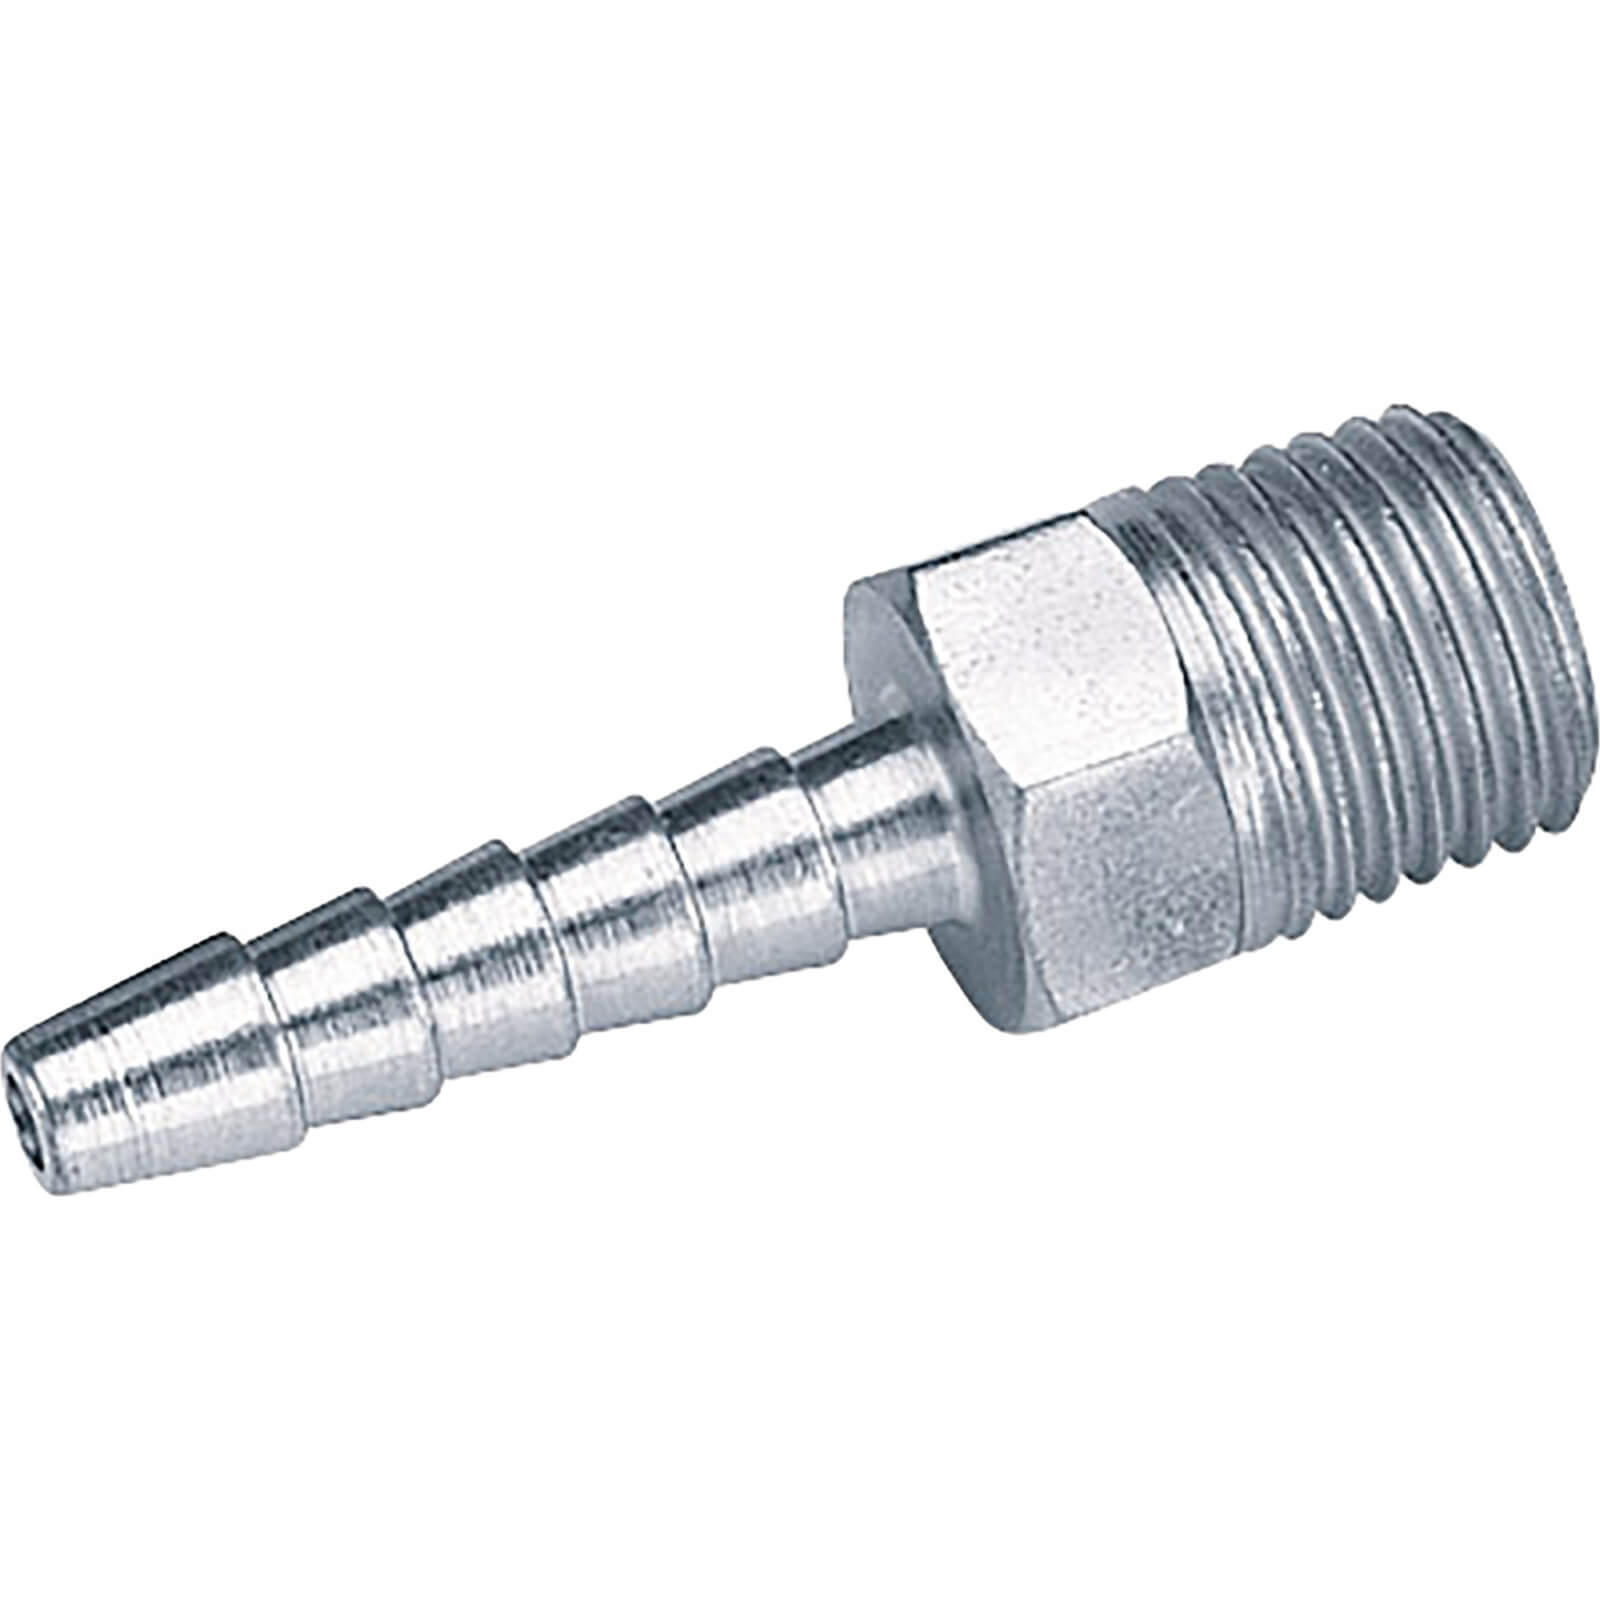 Photos - Equipment Accessory Draper PCL Tailpiece Air Line Fitting BSPT Male Thread 1/4" BSP 3/16" Pack 